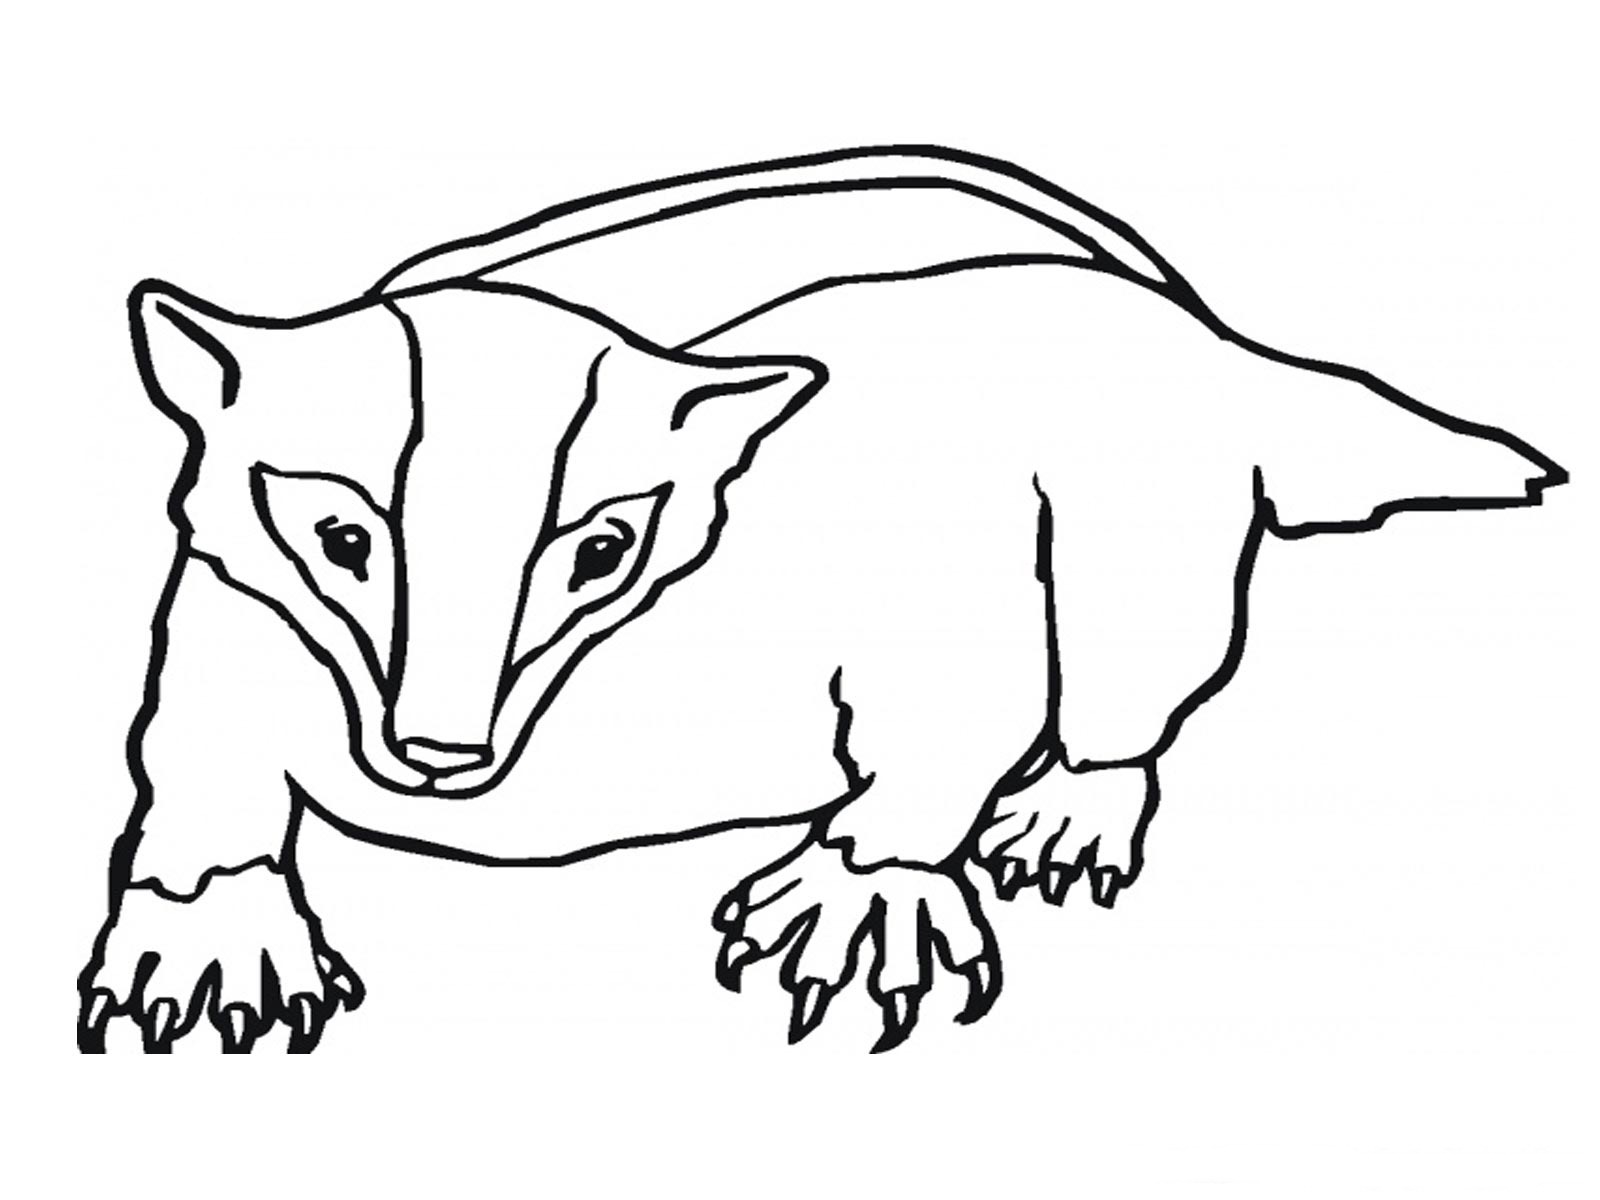 Coloring pages free printable. Badger clipart badger face